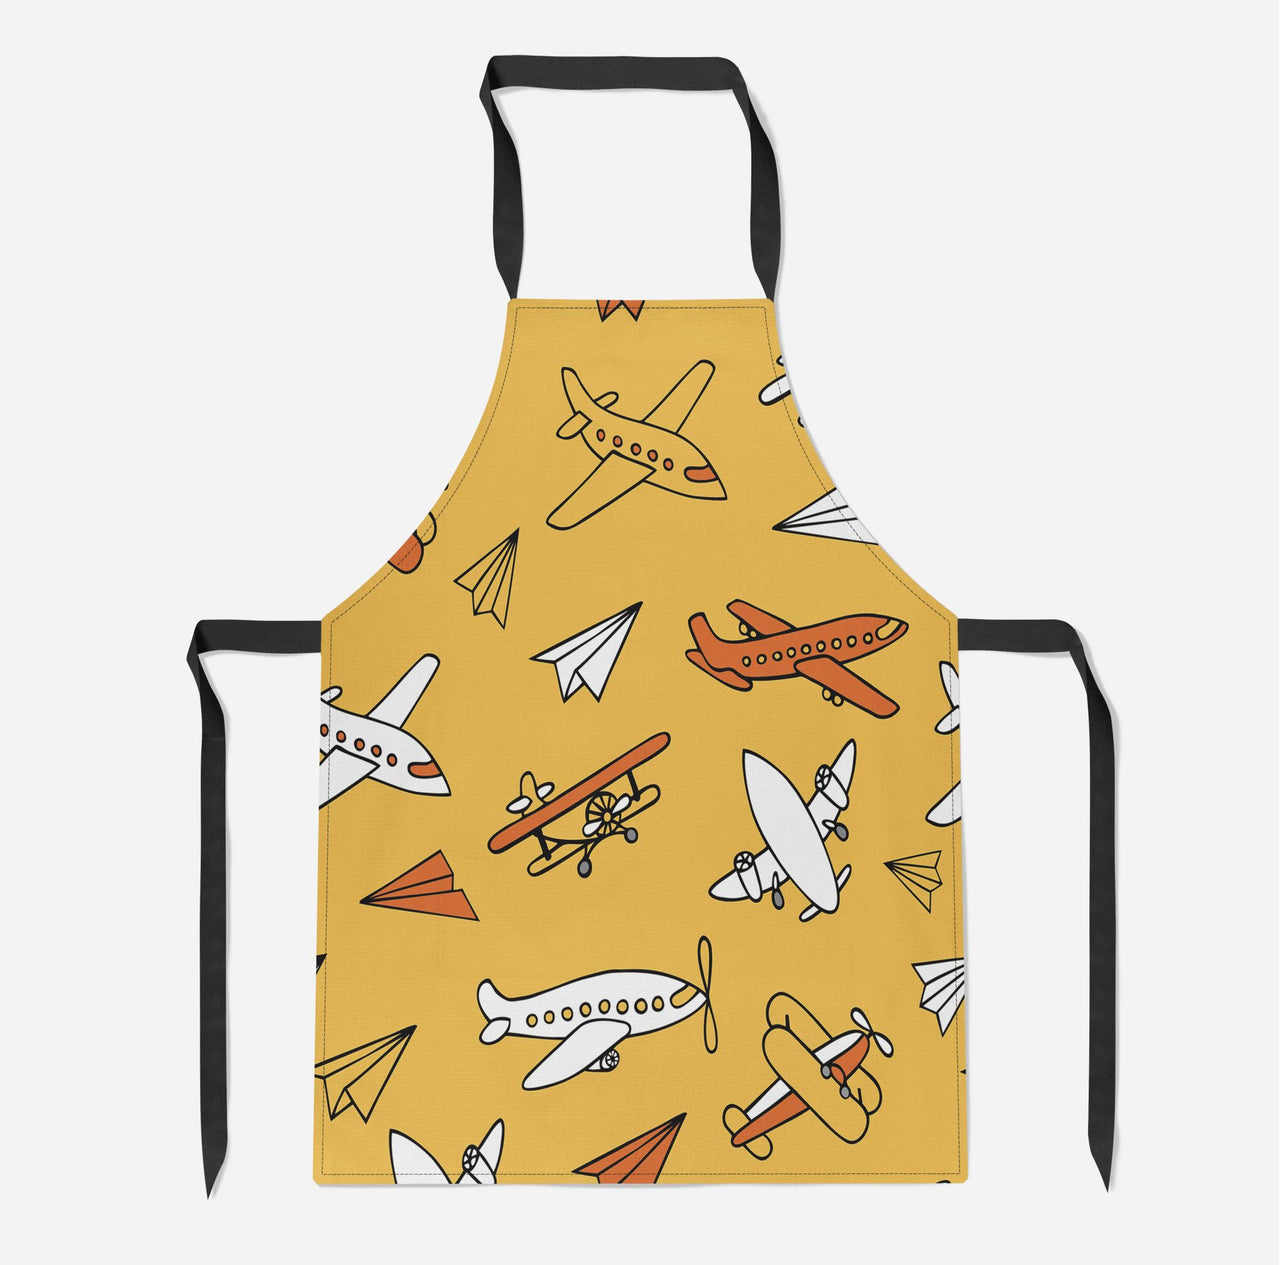 Super Drawings of Airplanes Designed Kitchen Aprons